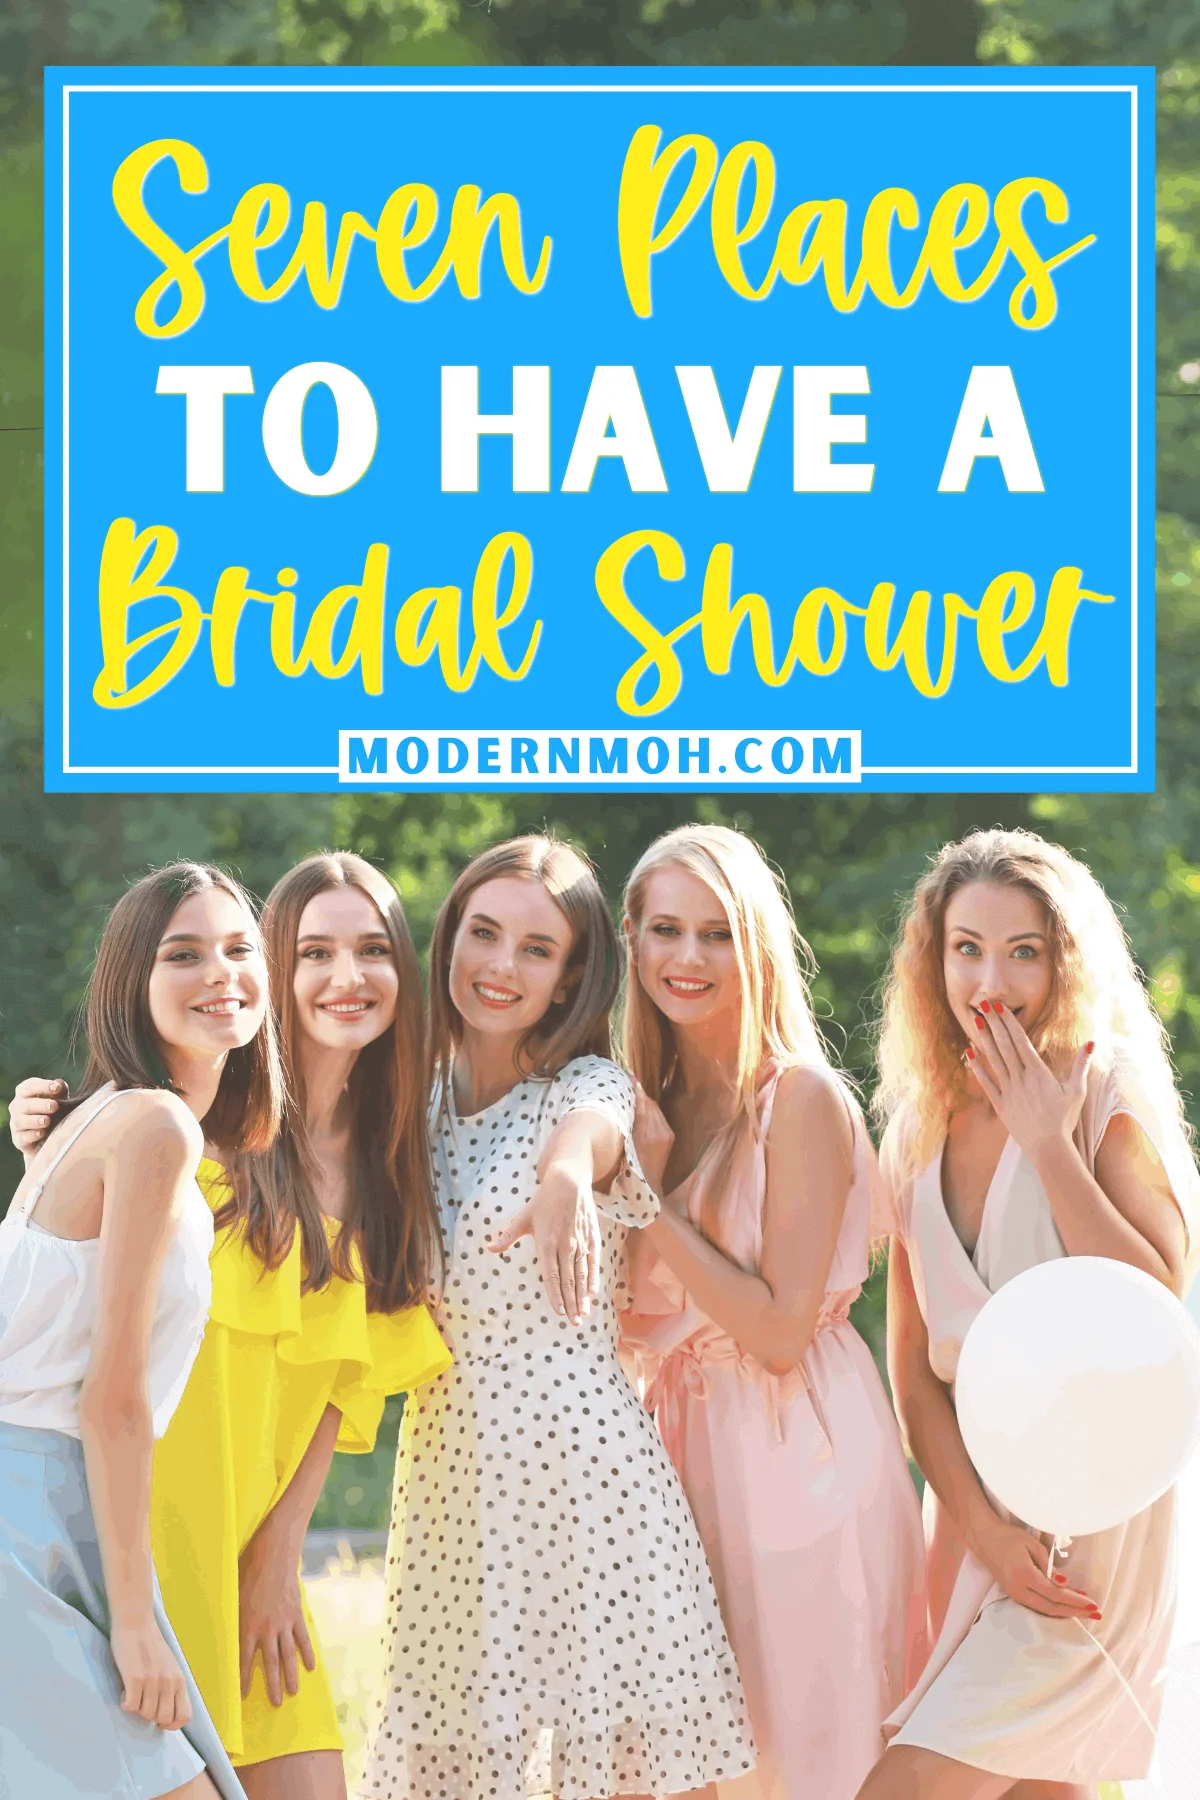 7 Places to Have a Bridal Shower